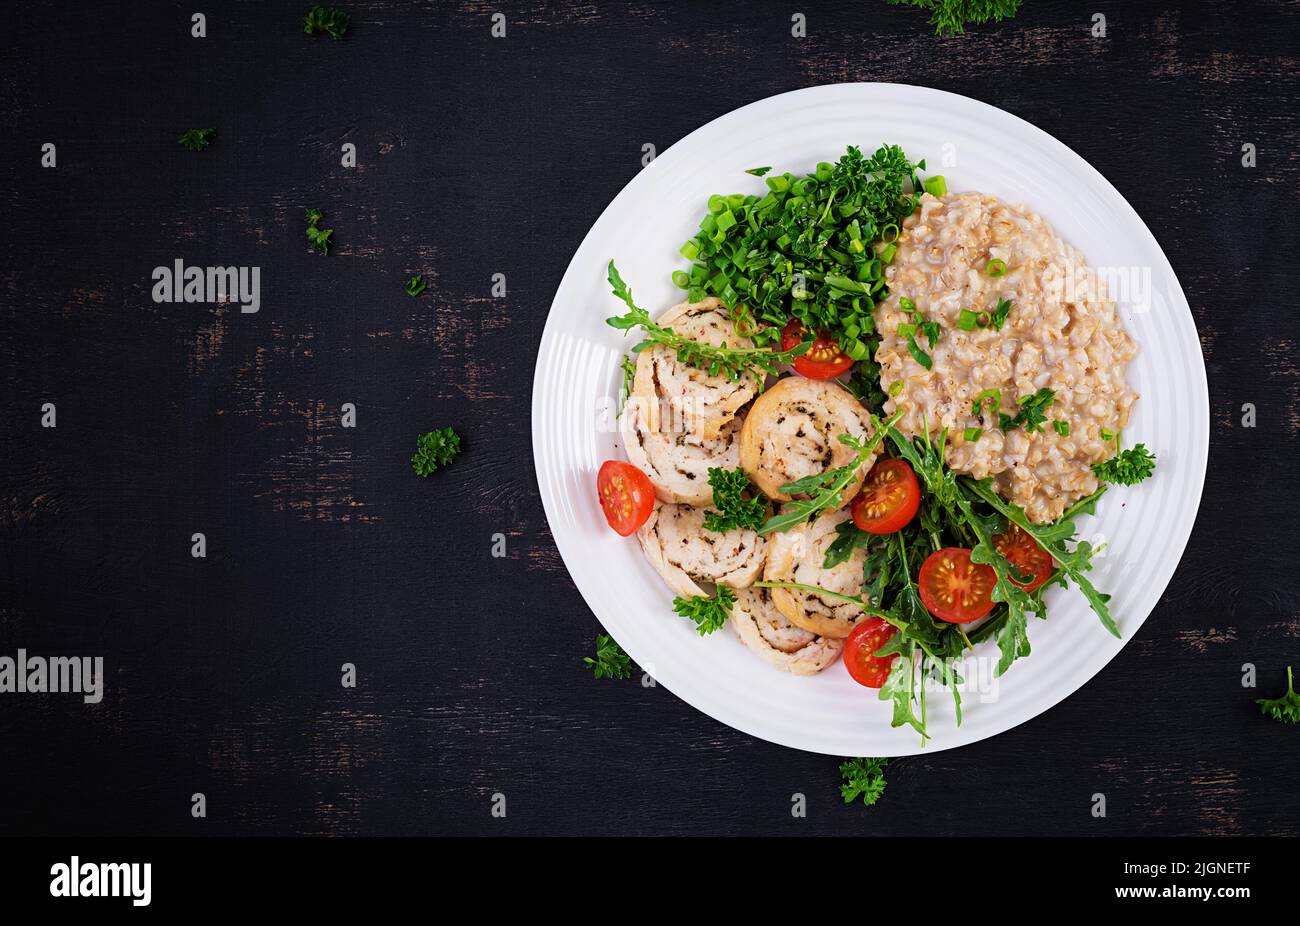 Brunch or lunch. Plate with oatmeal, chicken fillet, tomato and green herbs. Health food. Top view, overhead Stock Photo